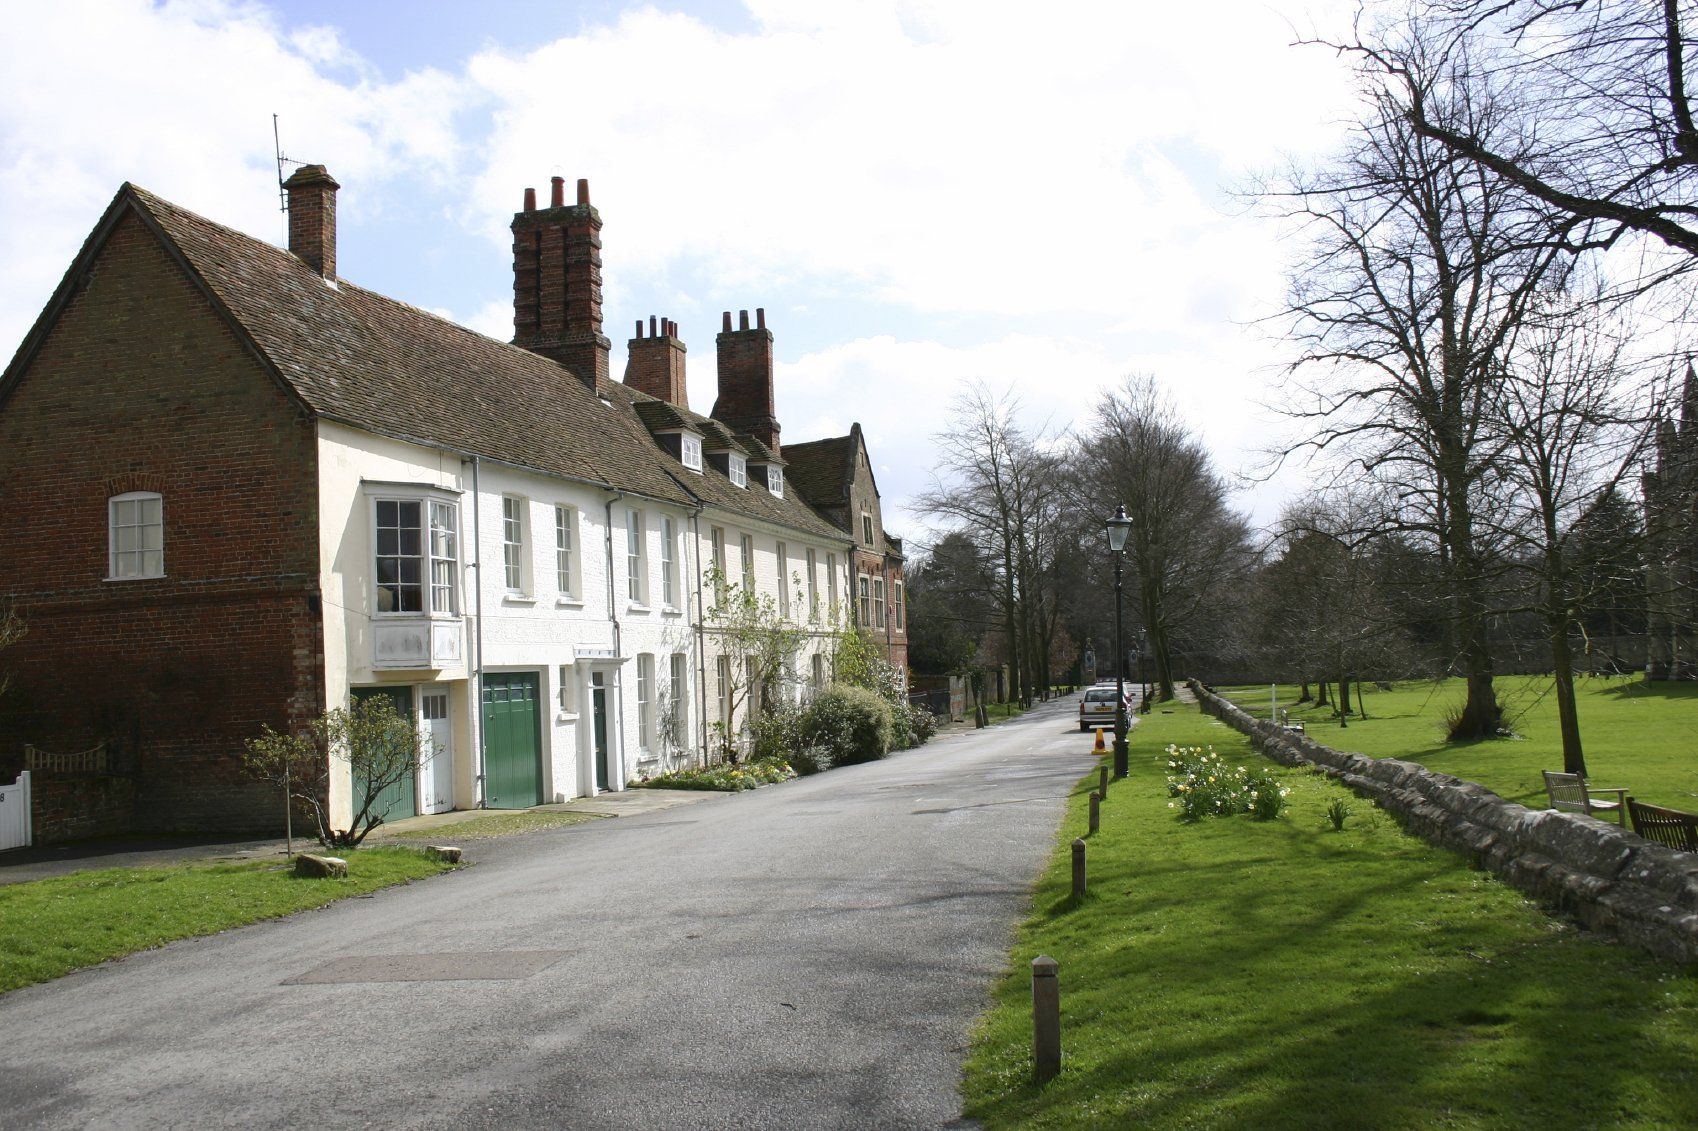 Quintessential English Cottages and Village Green